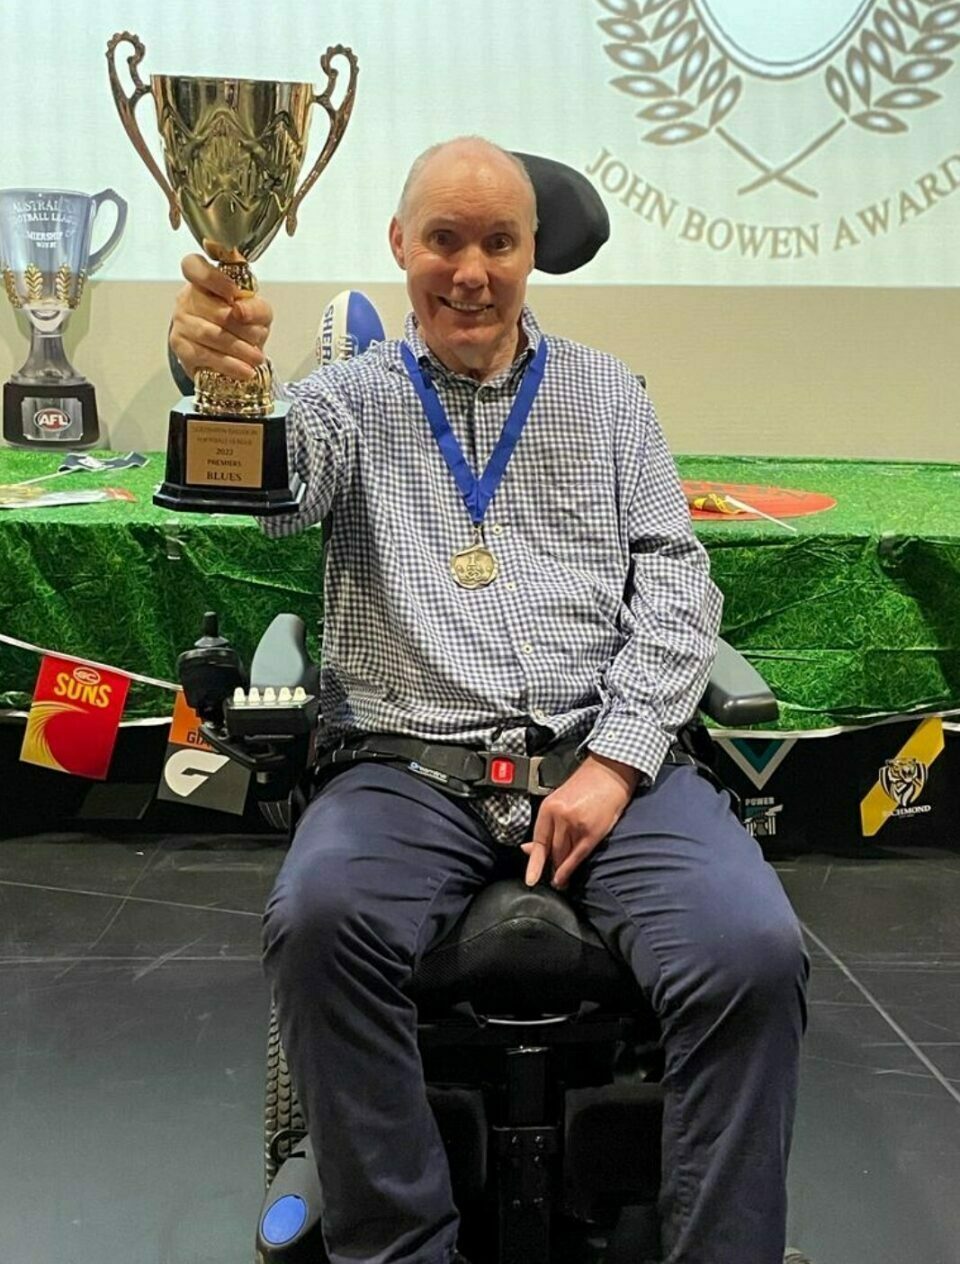 A man sitting on a wheelchair holding a gold trophy cup and medal.